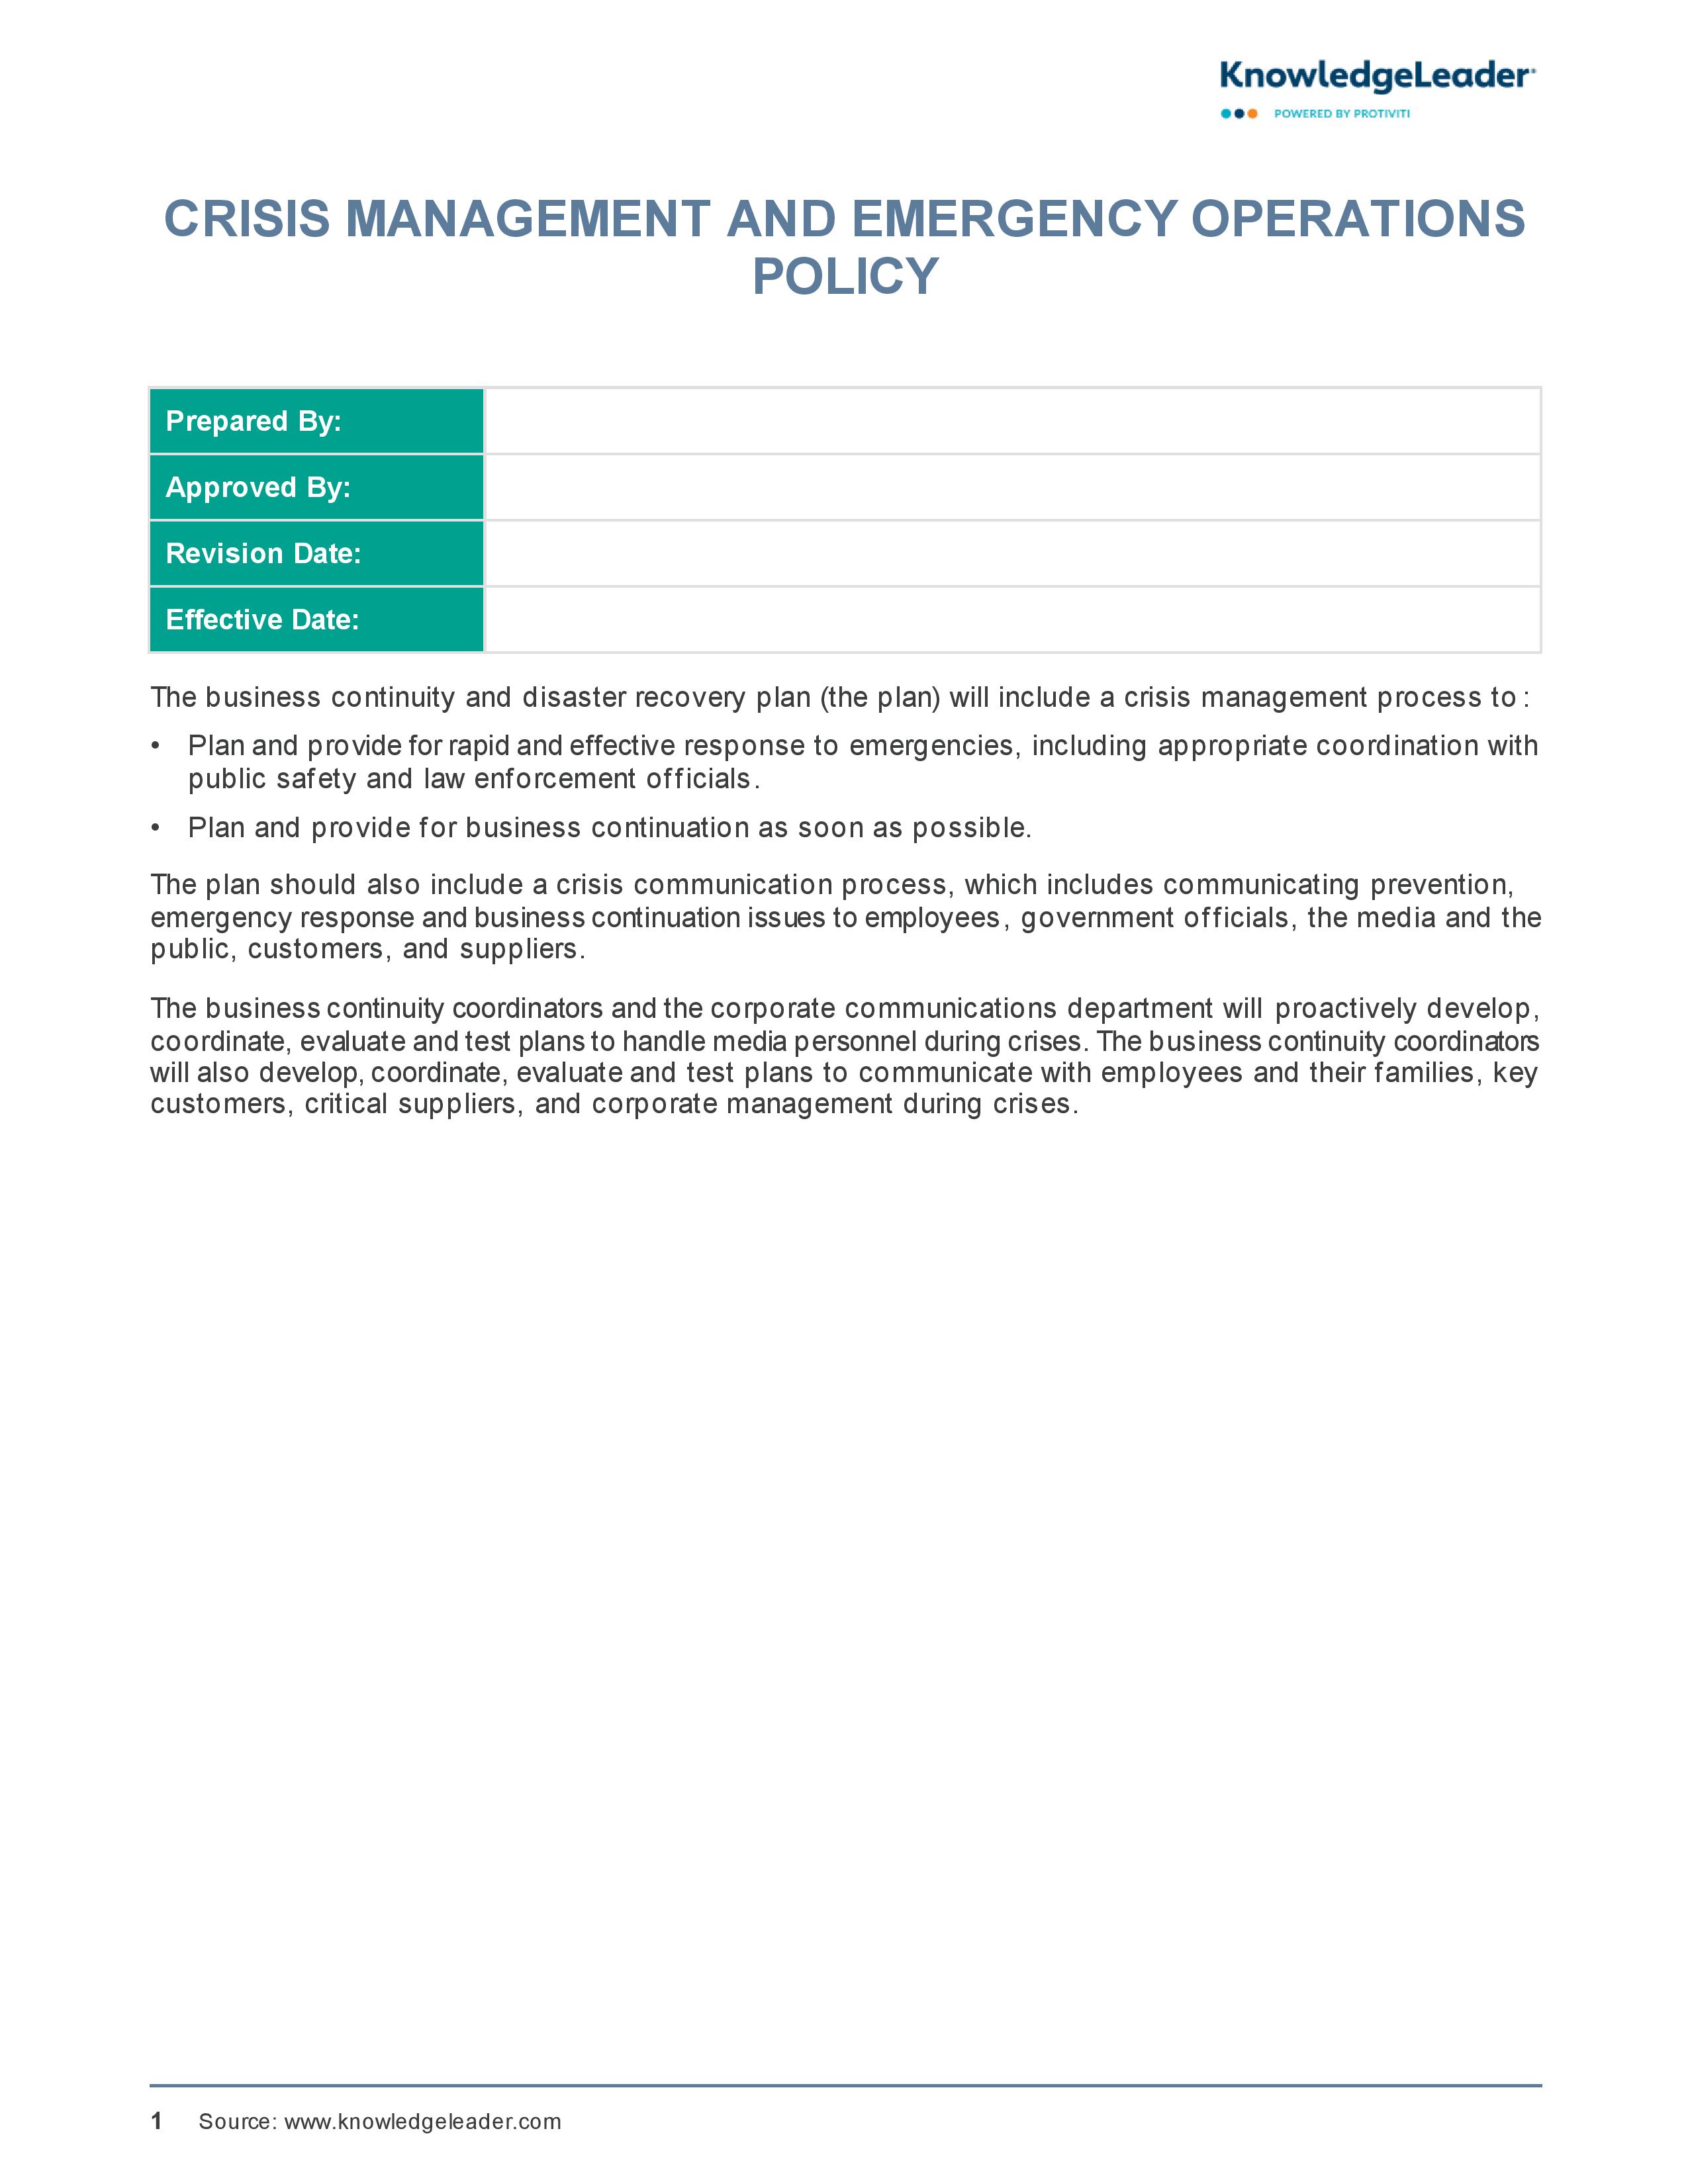 Screenshot of the first page of Crisis Management and Emergency Operations Policy